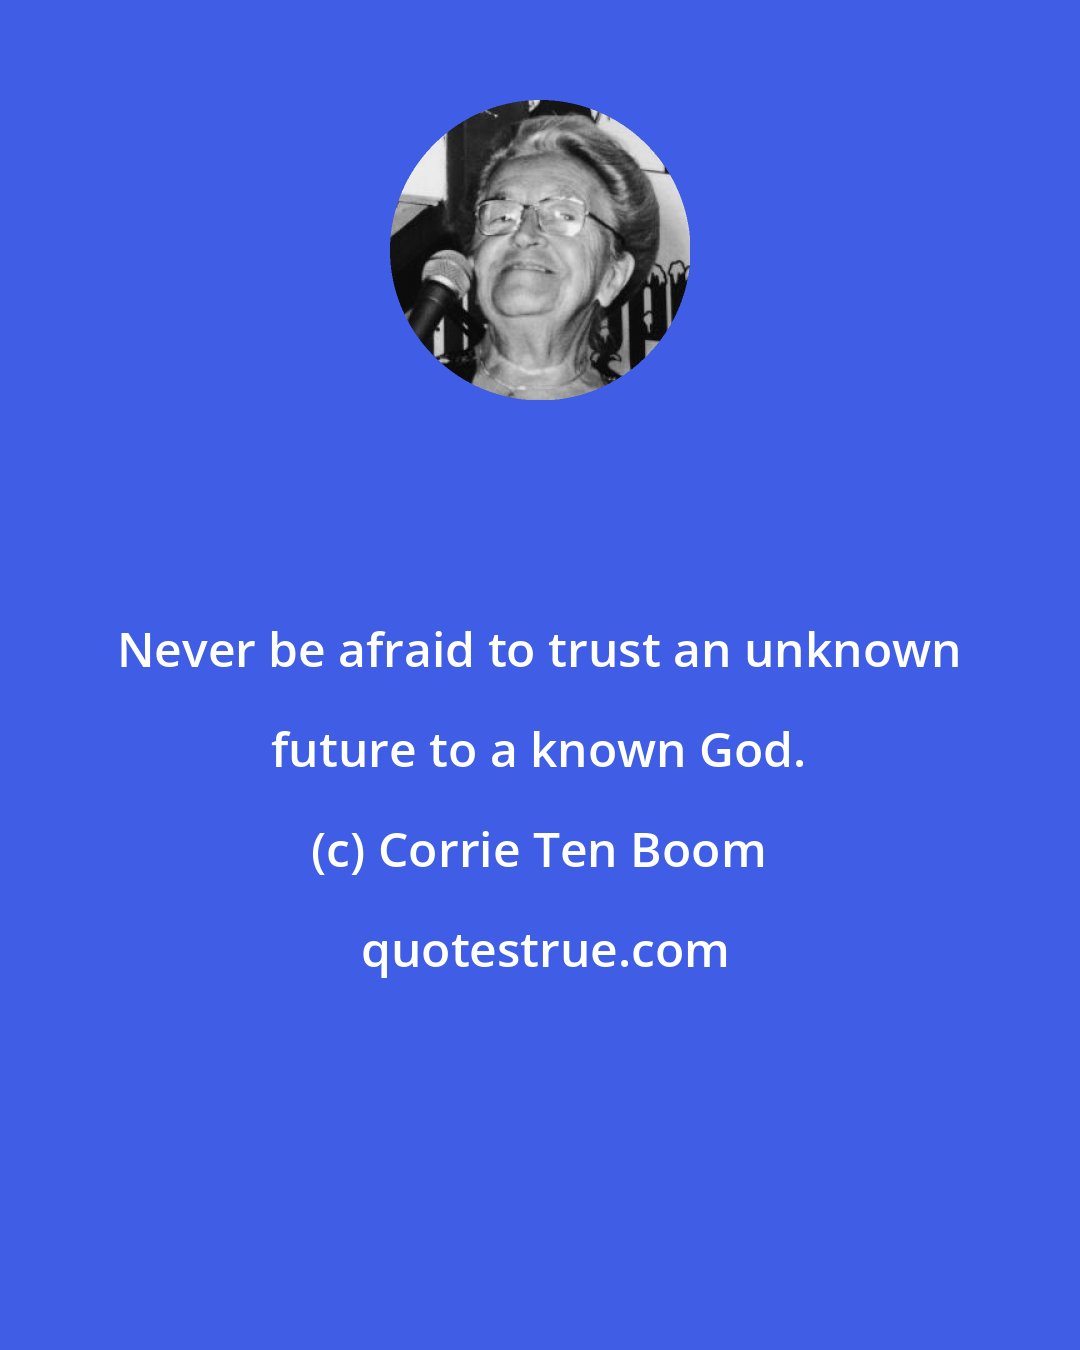 Corrie Ten Boom: Never be afraid to trust an unknown future to a known God.